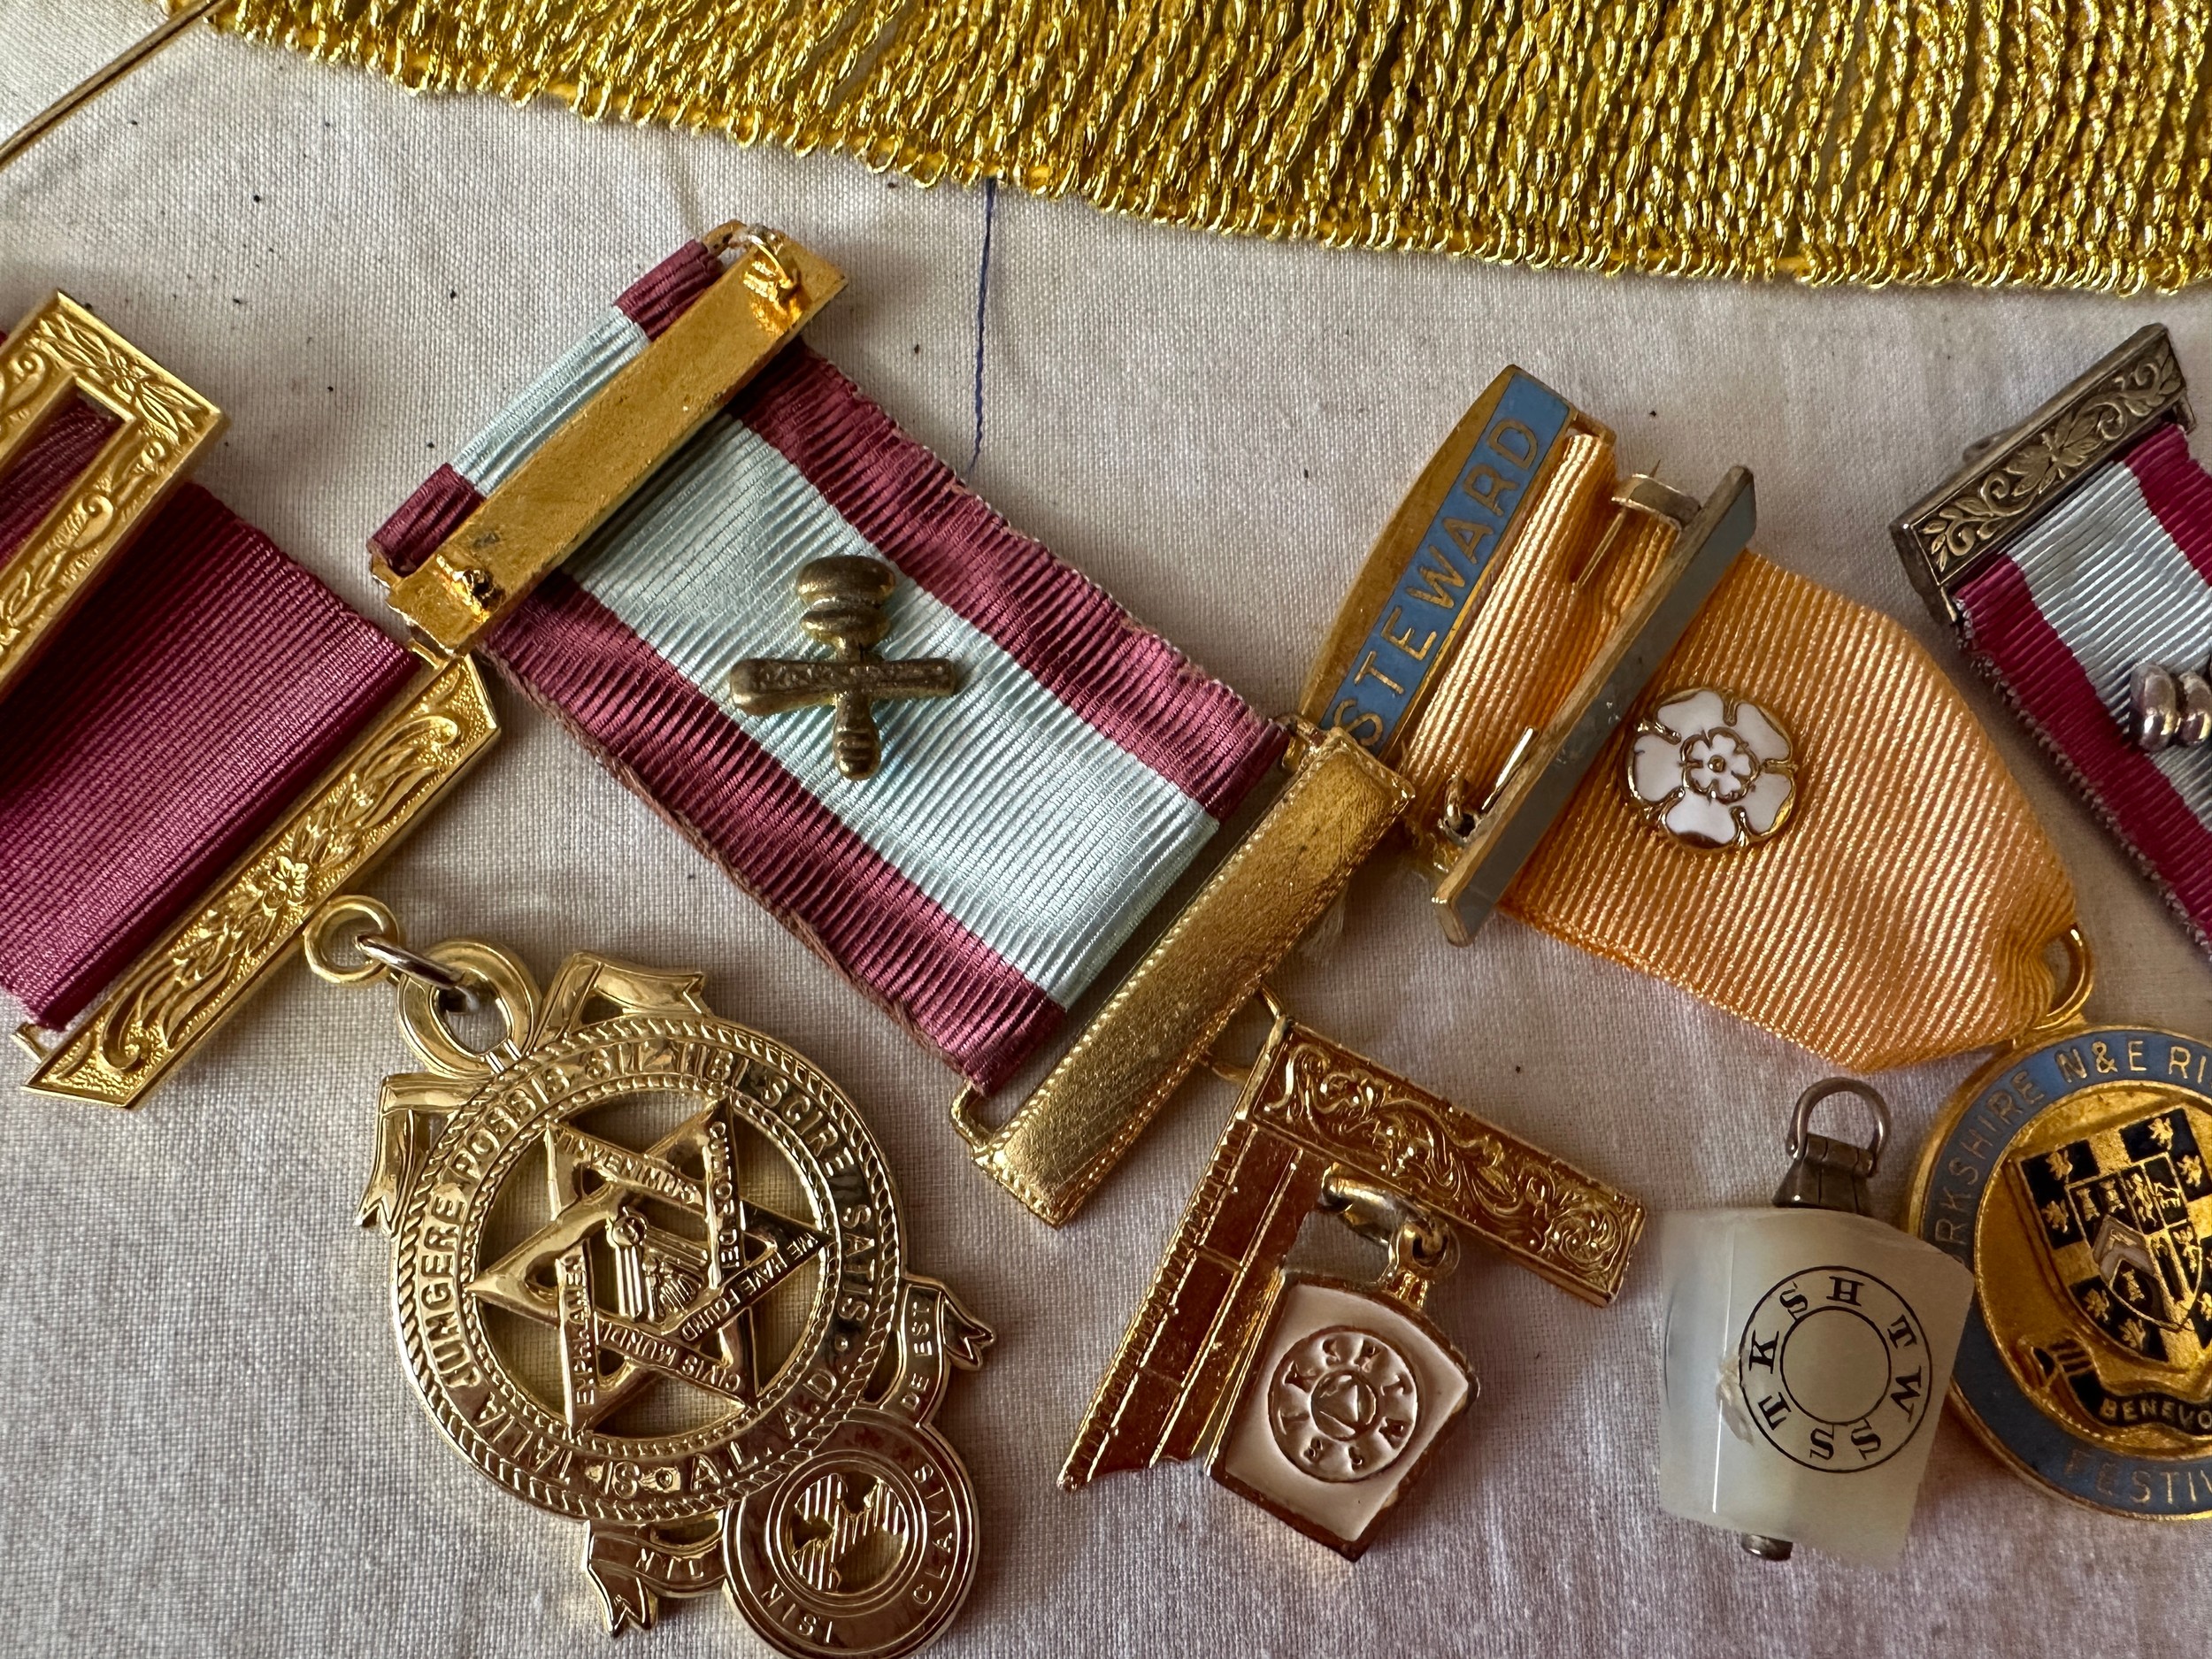 Quantity of masonic regalia to include medals, medallions, aprons, badges, sachets and walking - Image 4 of 7